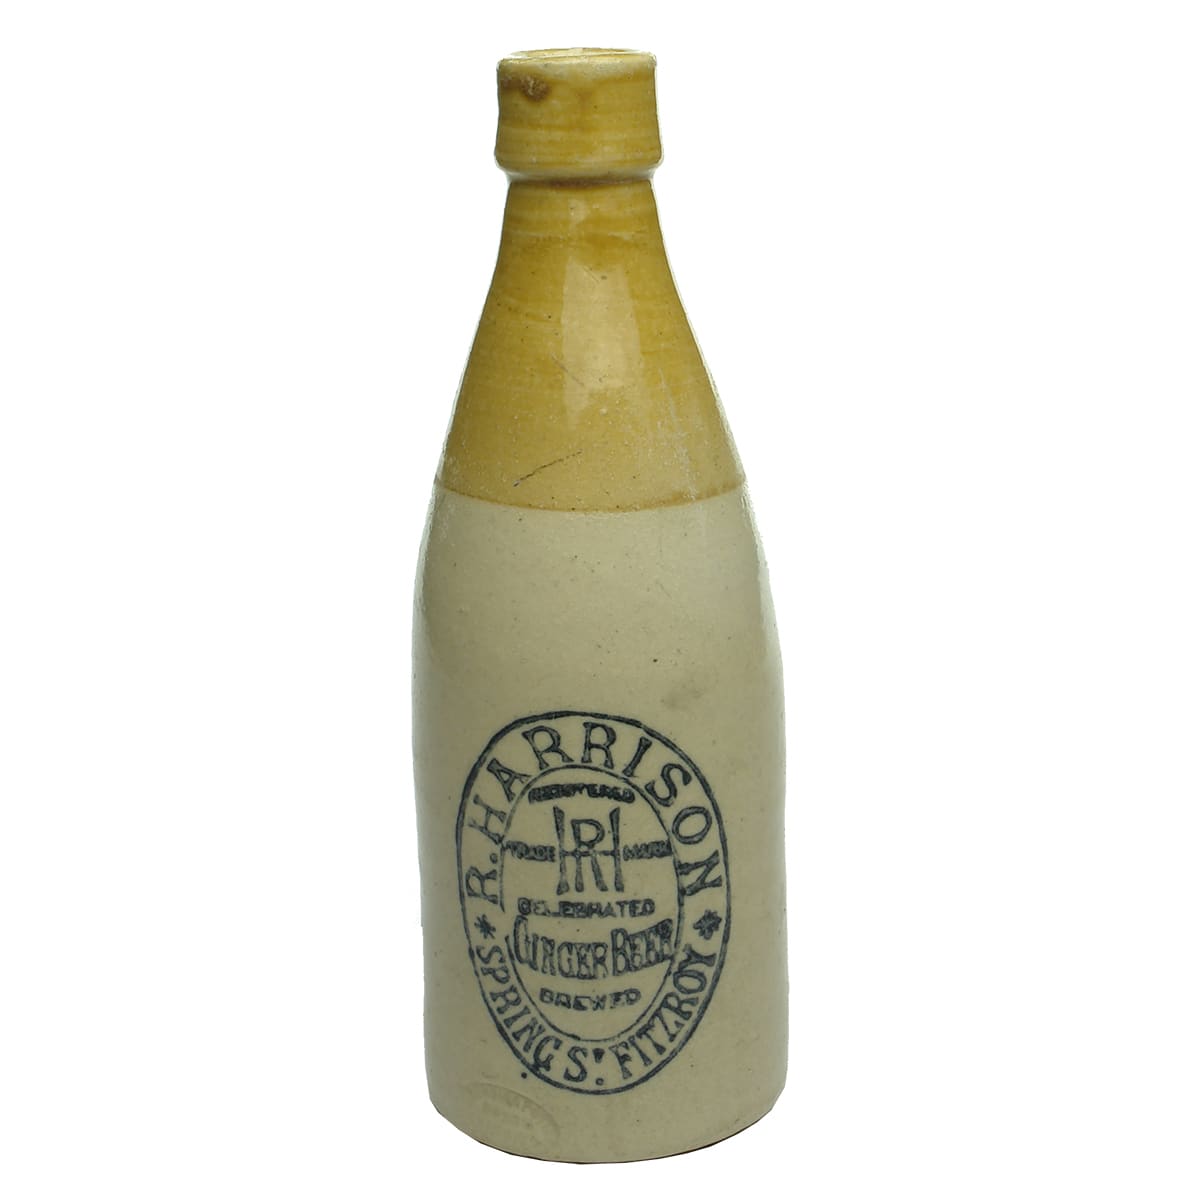 Ginger Beer. R. Harrison, Fitzroy. Champagne. Tan Top. 10 oz. (Victoria)